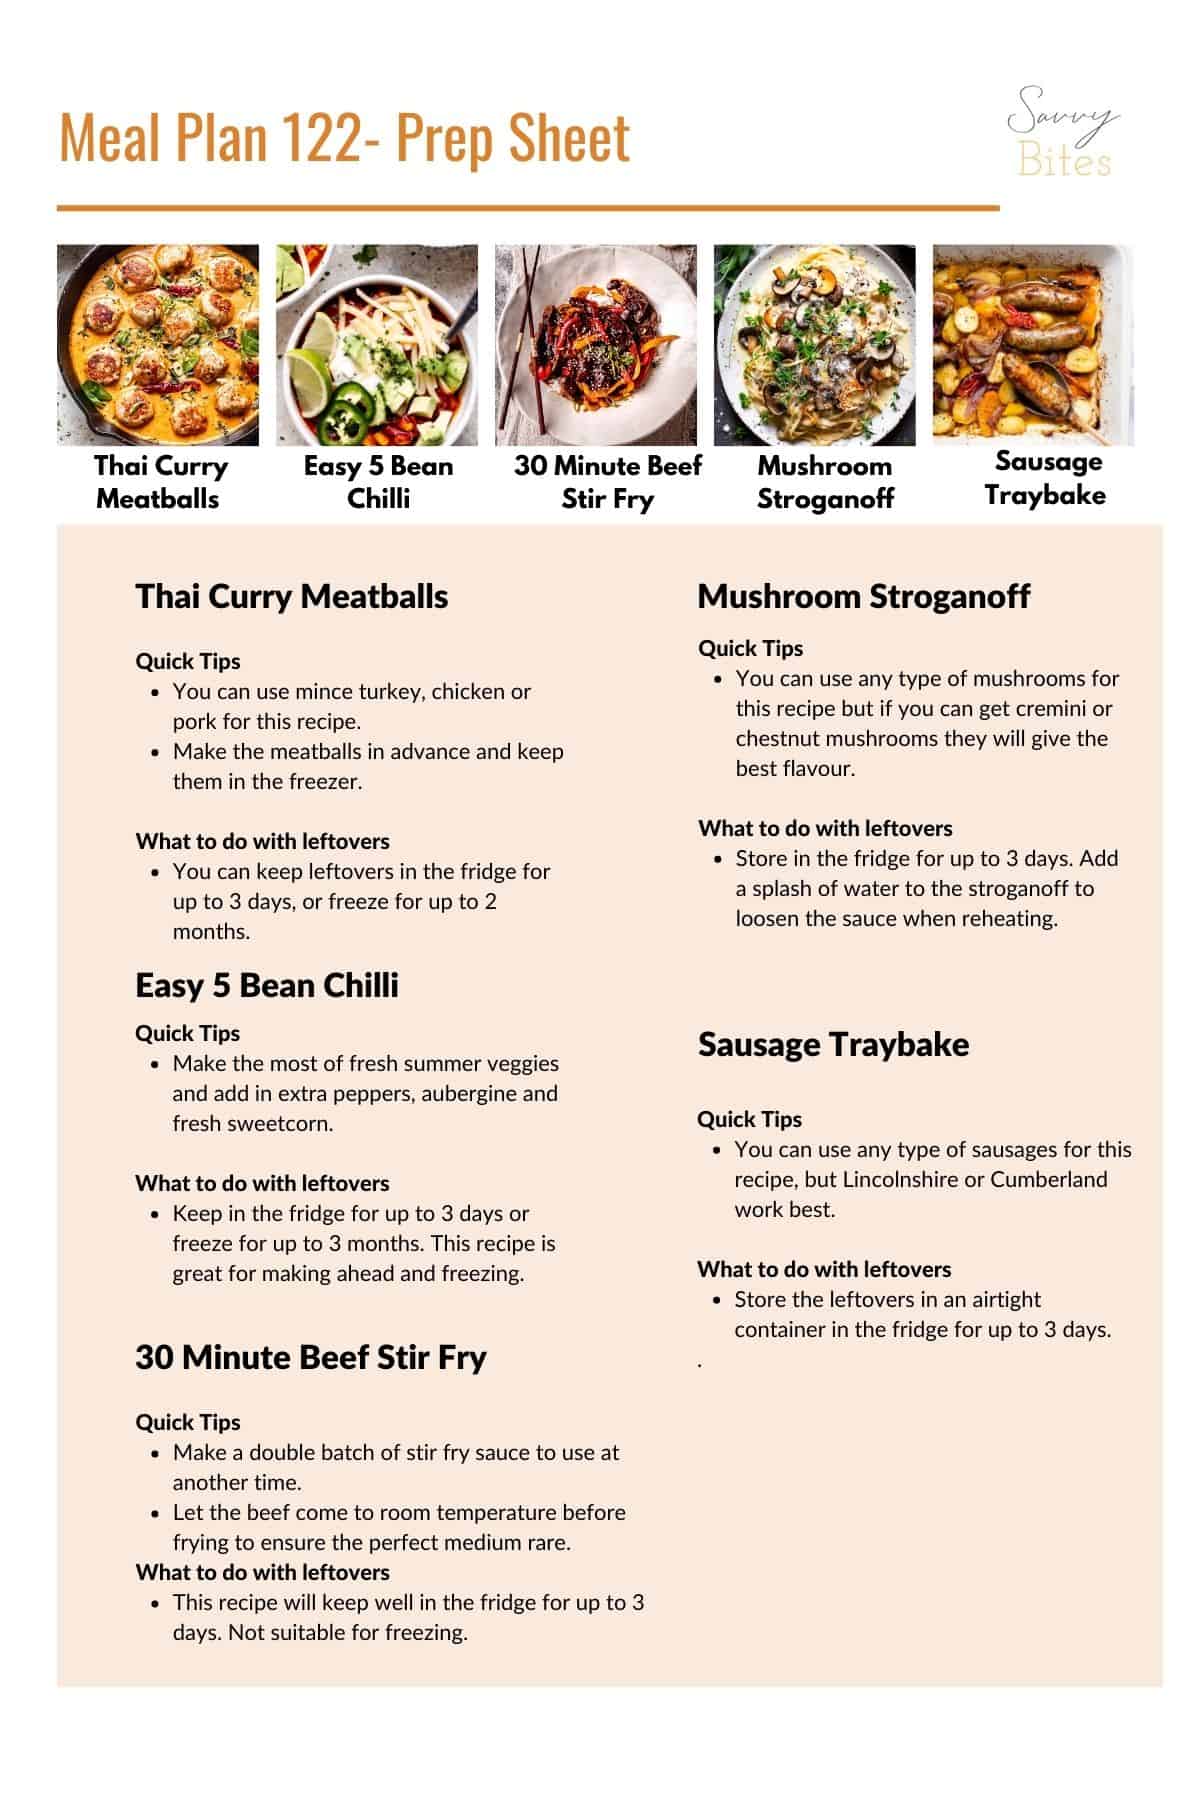 Budget meal plan 122 quick tips.